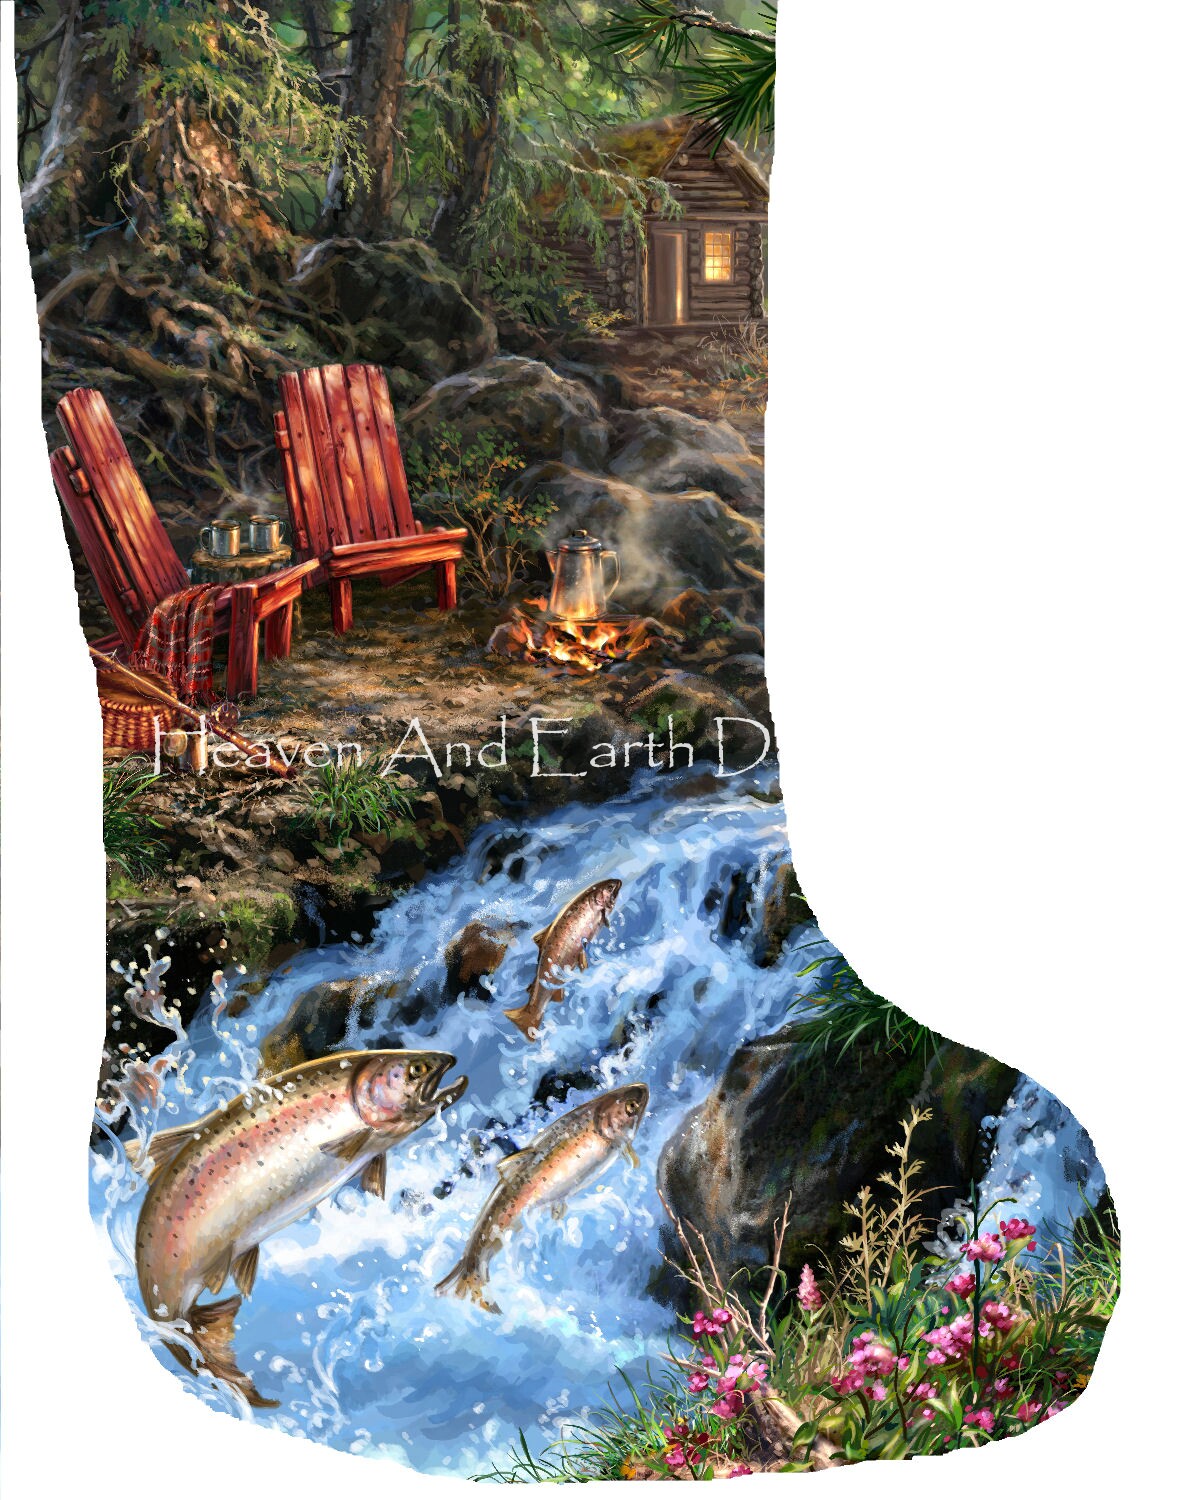 https://www.heavenandearthdesigns.com/images/stockings/Stocking%20The%20Fishing%20Hole.jpg